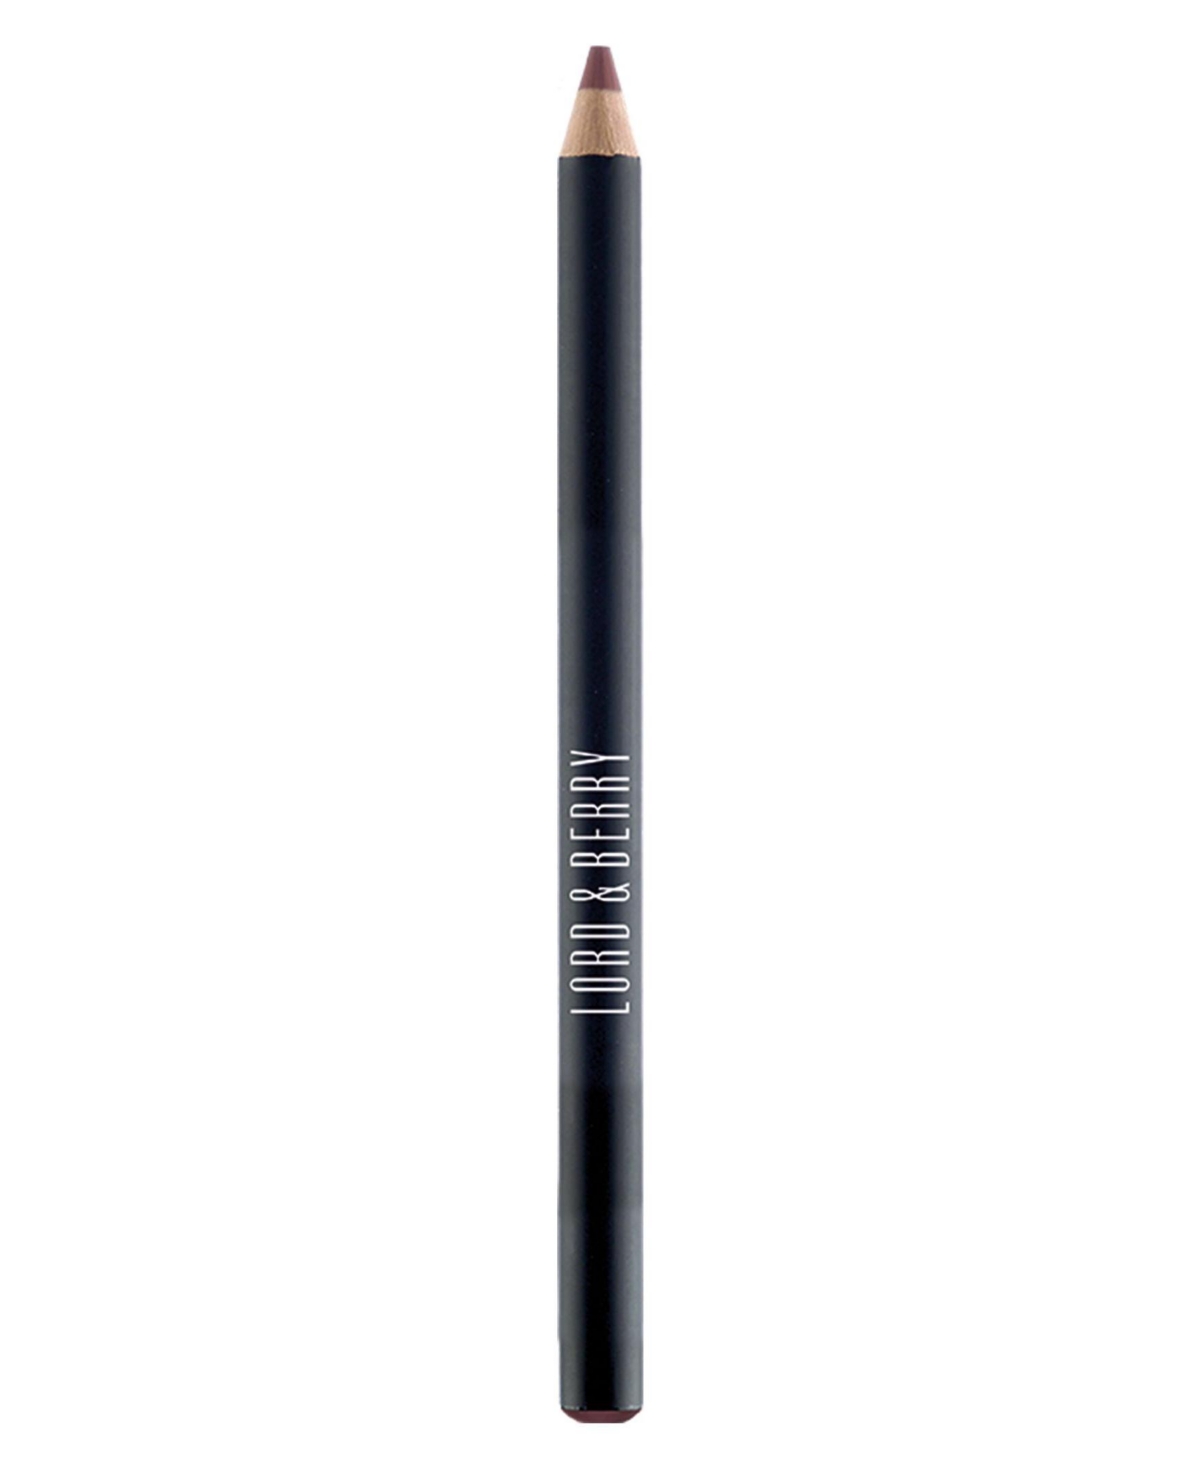 Lord & Berry Ultimate Lip Liner In Nude - Natural Suede Nude